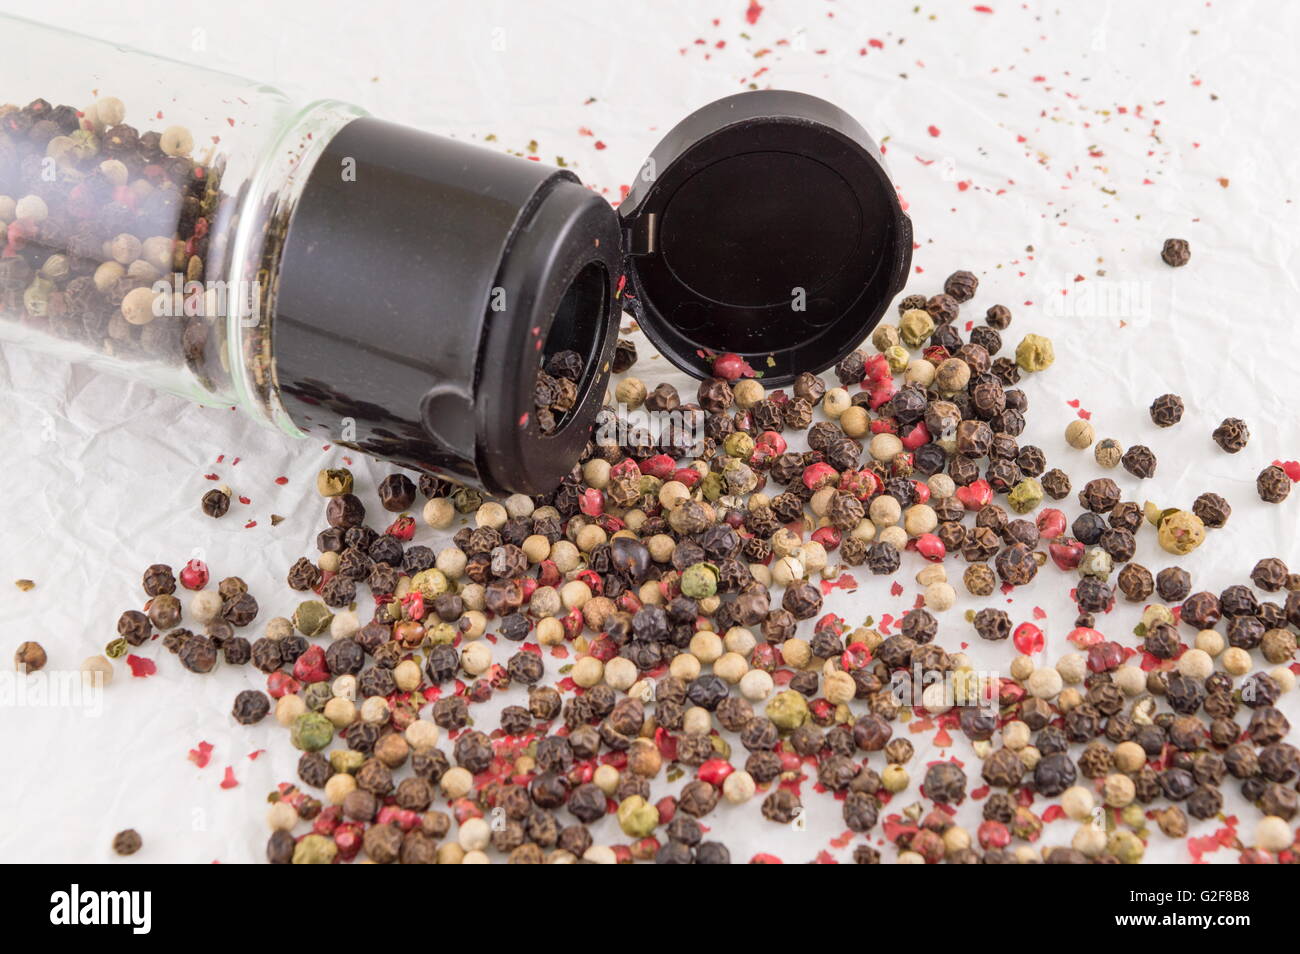 https://c8.alamy.com/comp/G2F8B8/red-and-brown-pepper-balls-on-the-white-table-G2F8B8.jpg